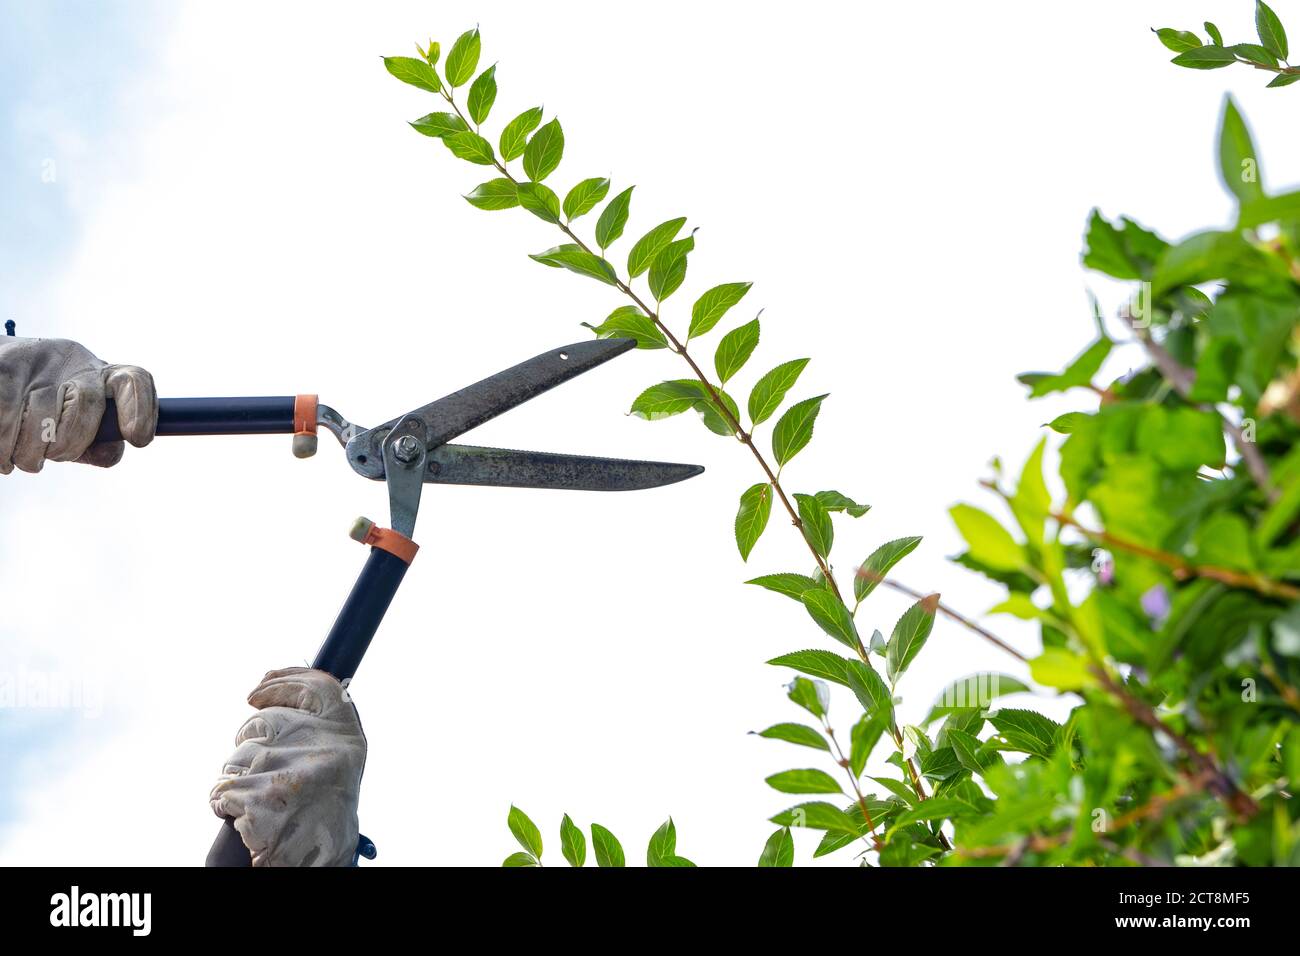 Work glove covered hands prepare to trim bush branches with hedge shears. Stock Photo